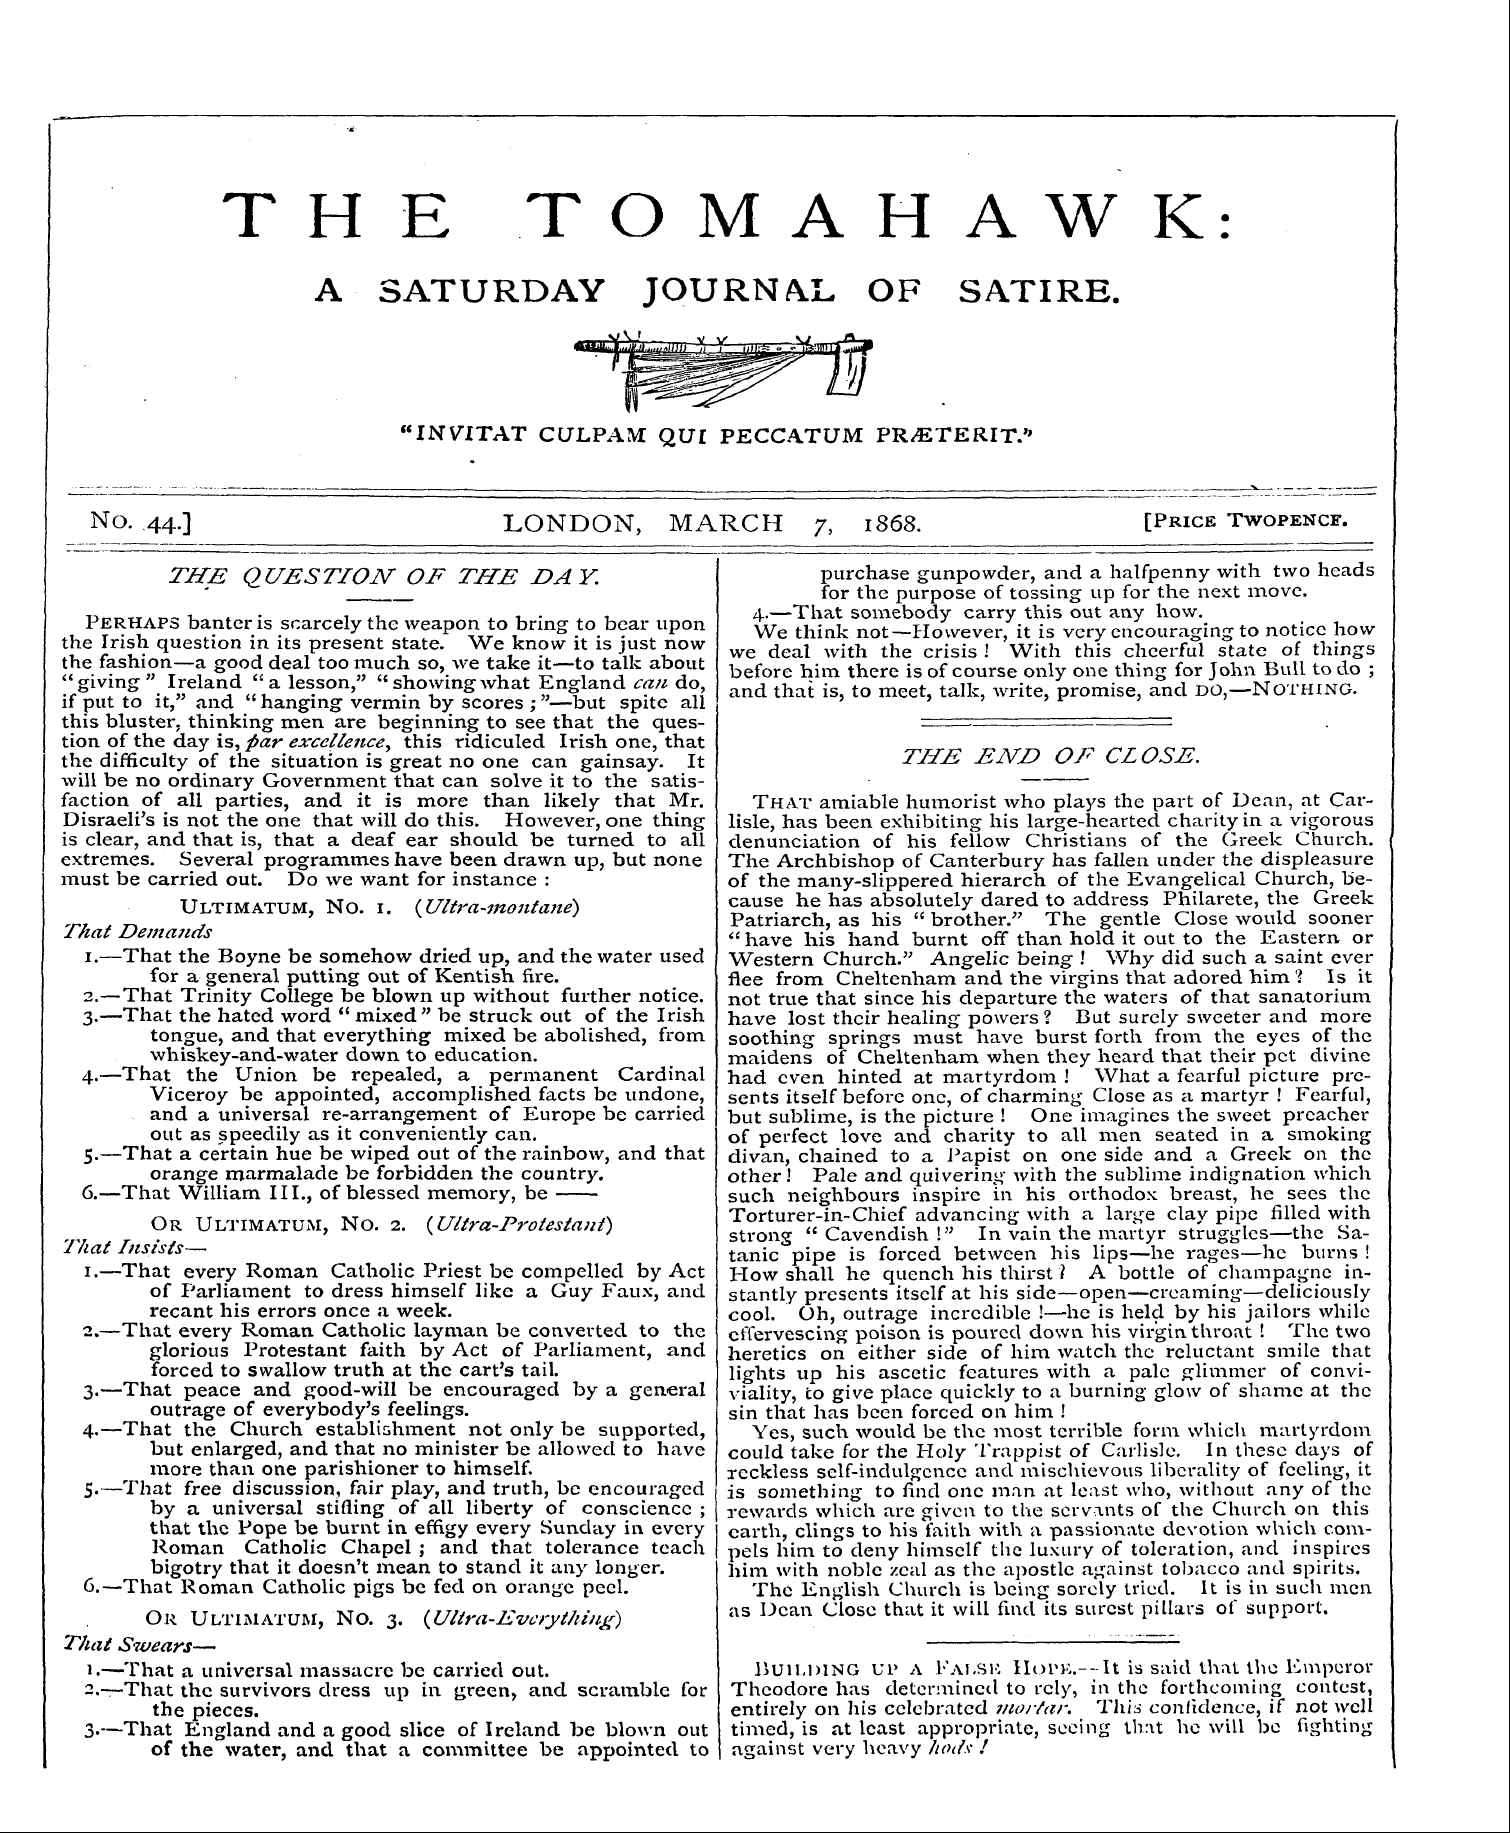 Tomahawk (1867-1870): jS F Y, 1st edition - The Enjd Of Close.